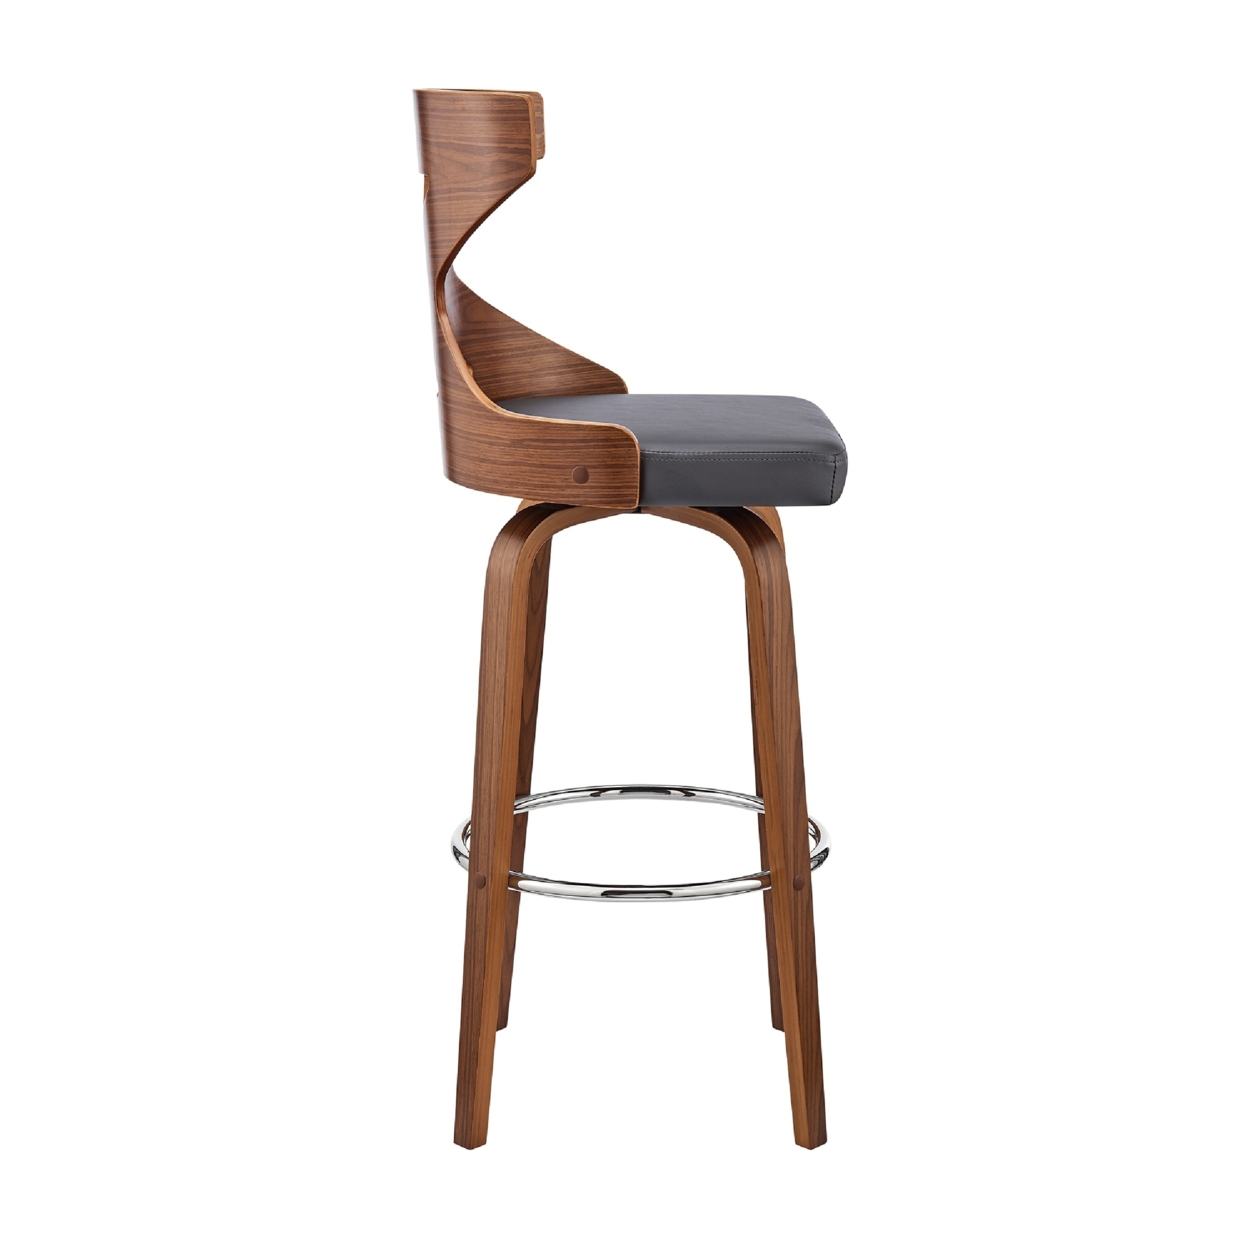 Swivel Barstool With Curved Wooden X Back, Brown And Gray- Saltoro Sherpi